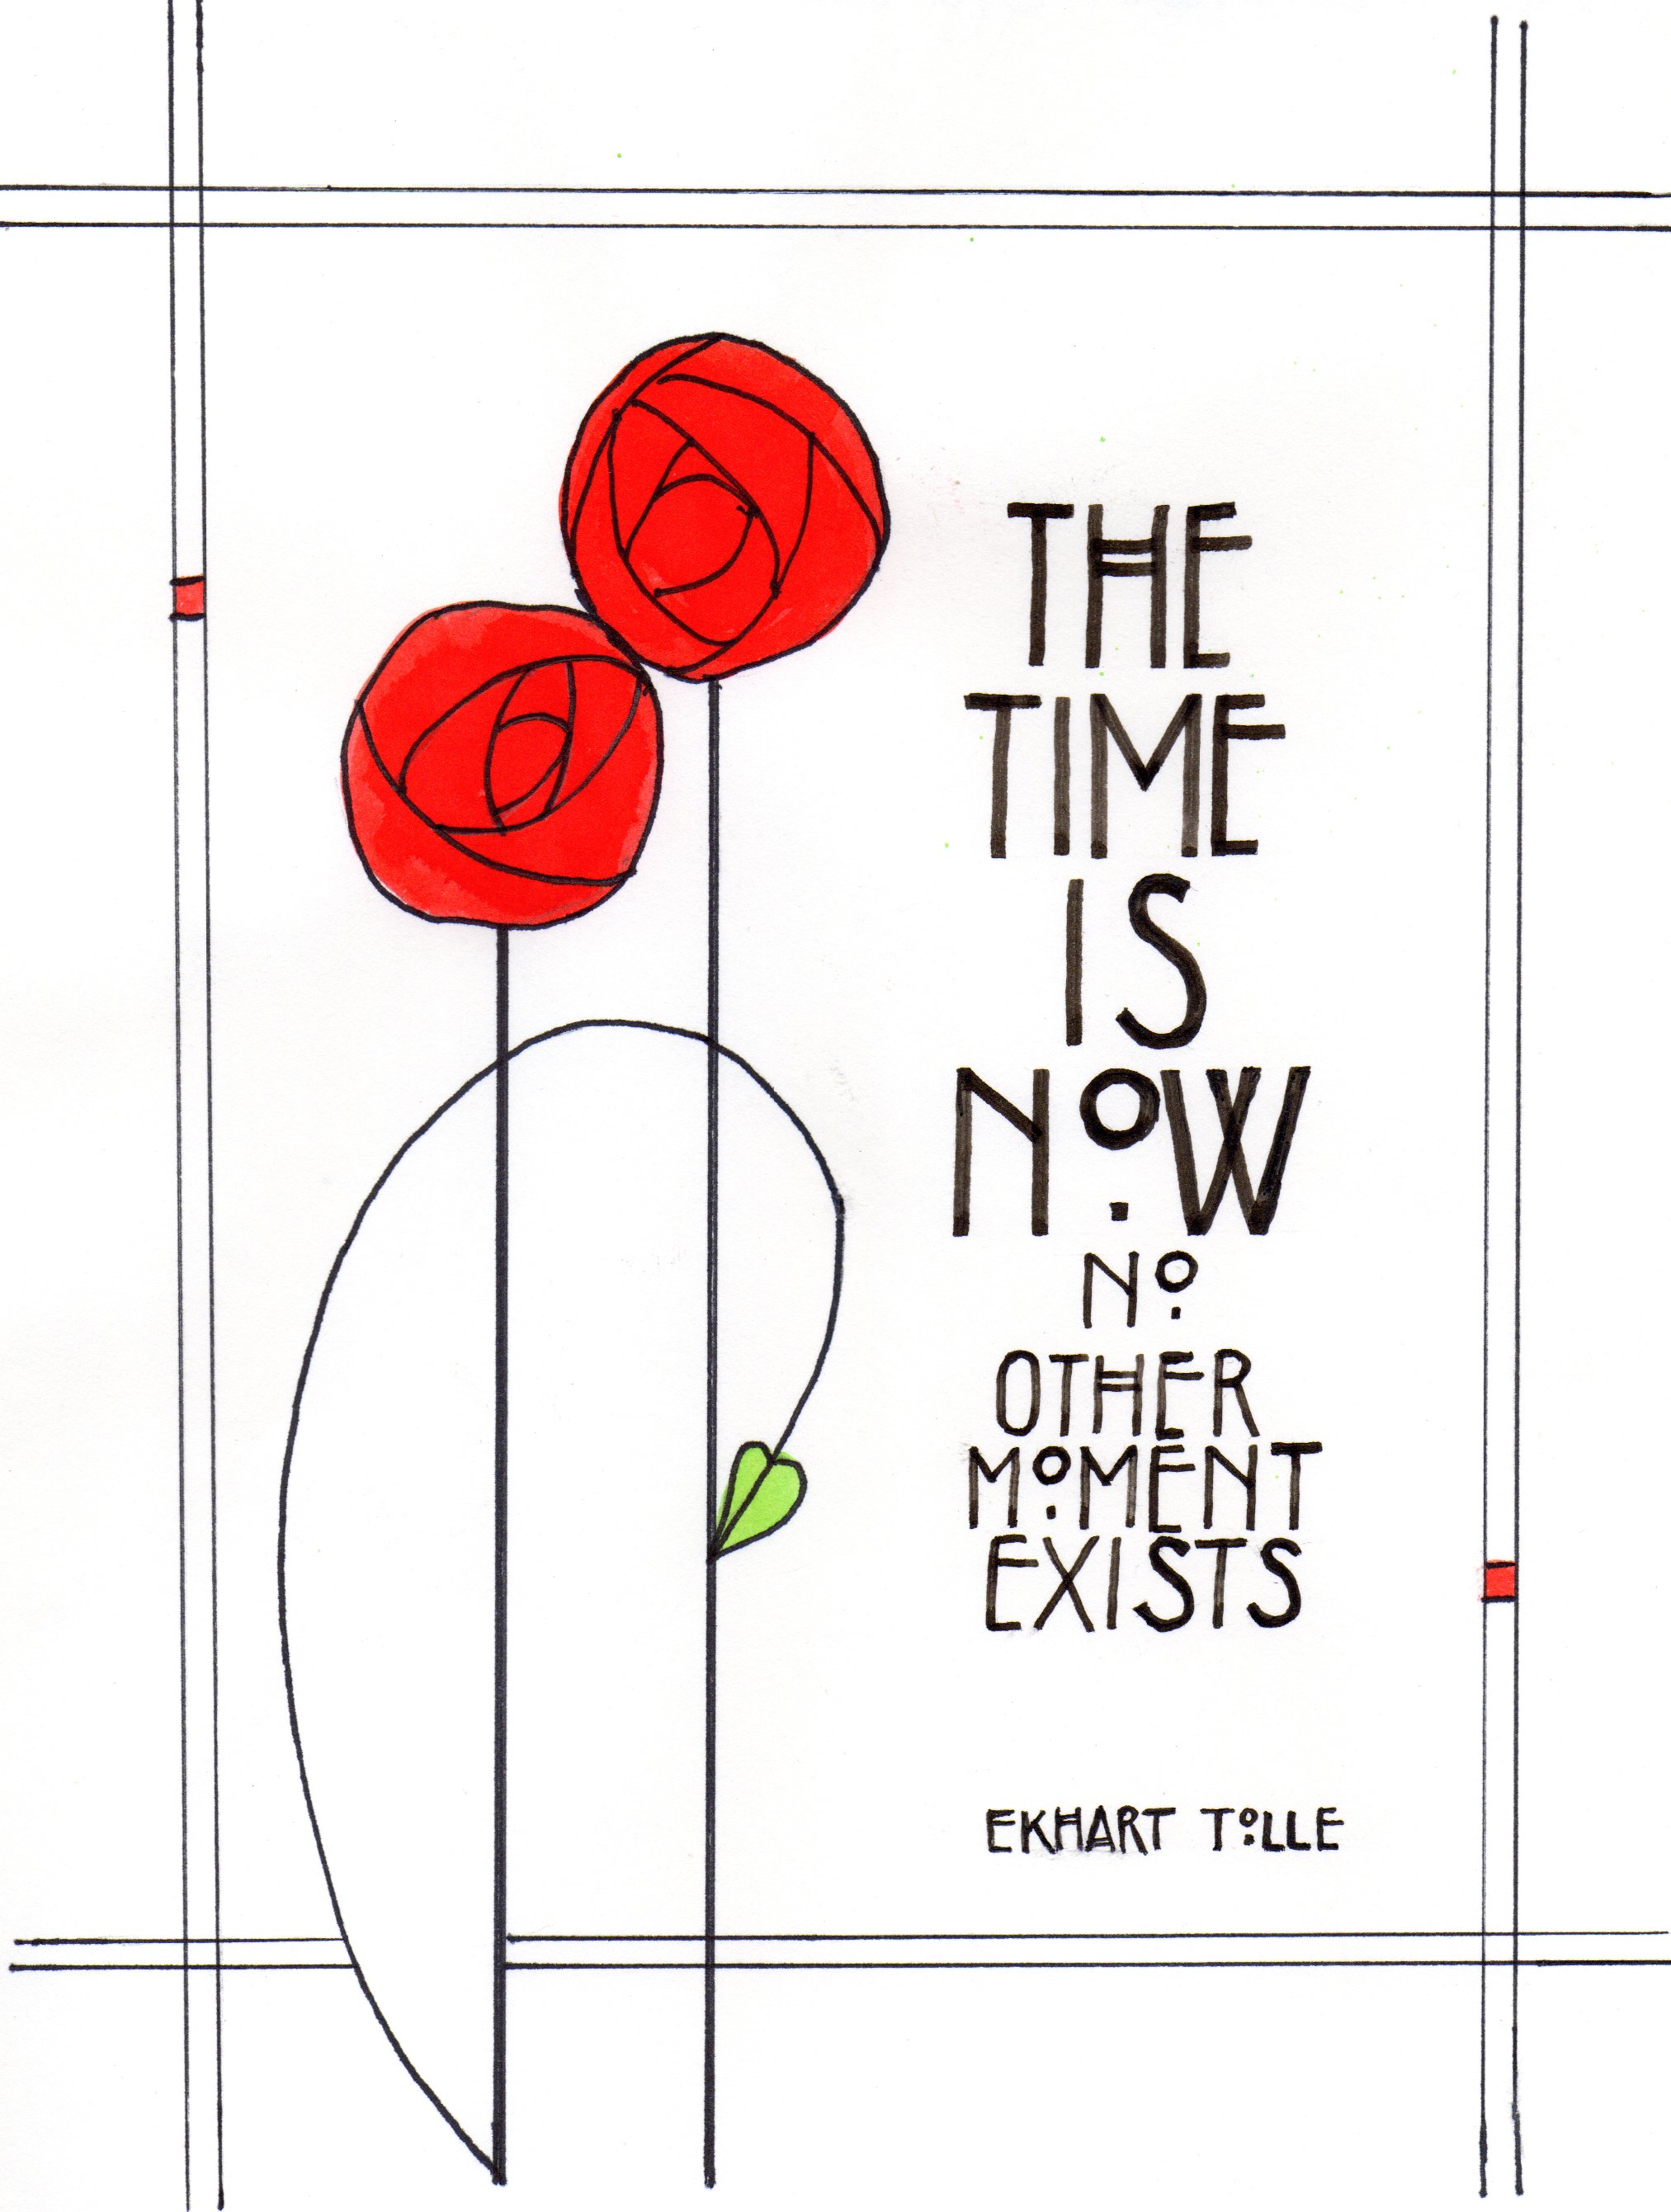 Carole Webster - The Time is Now.jpg